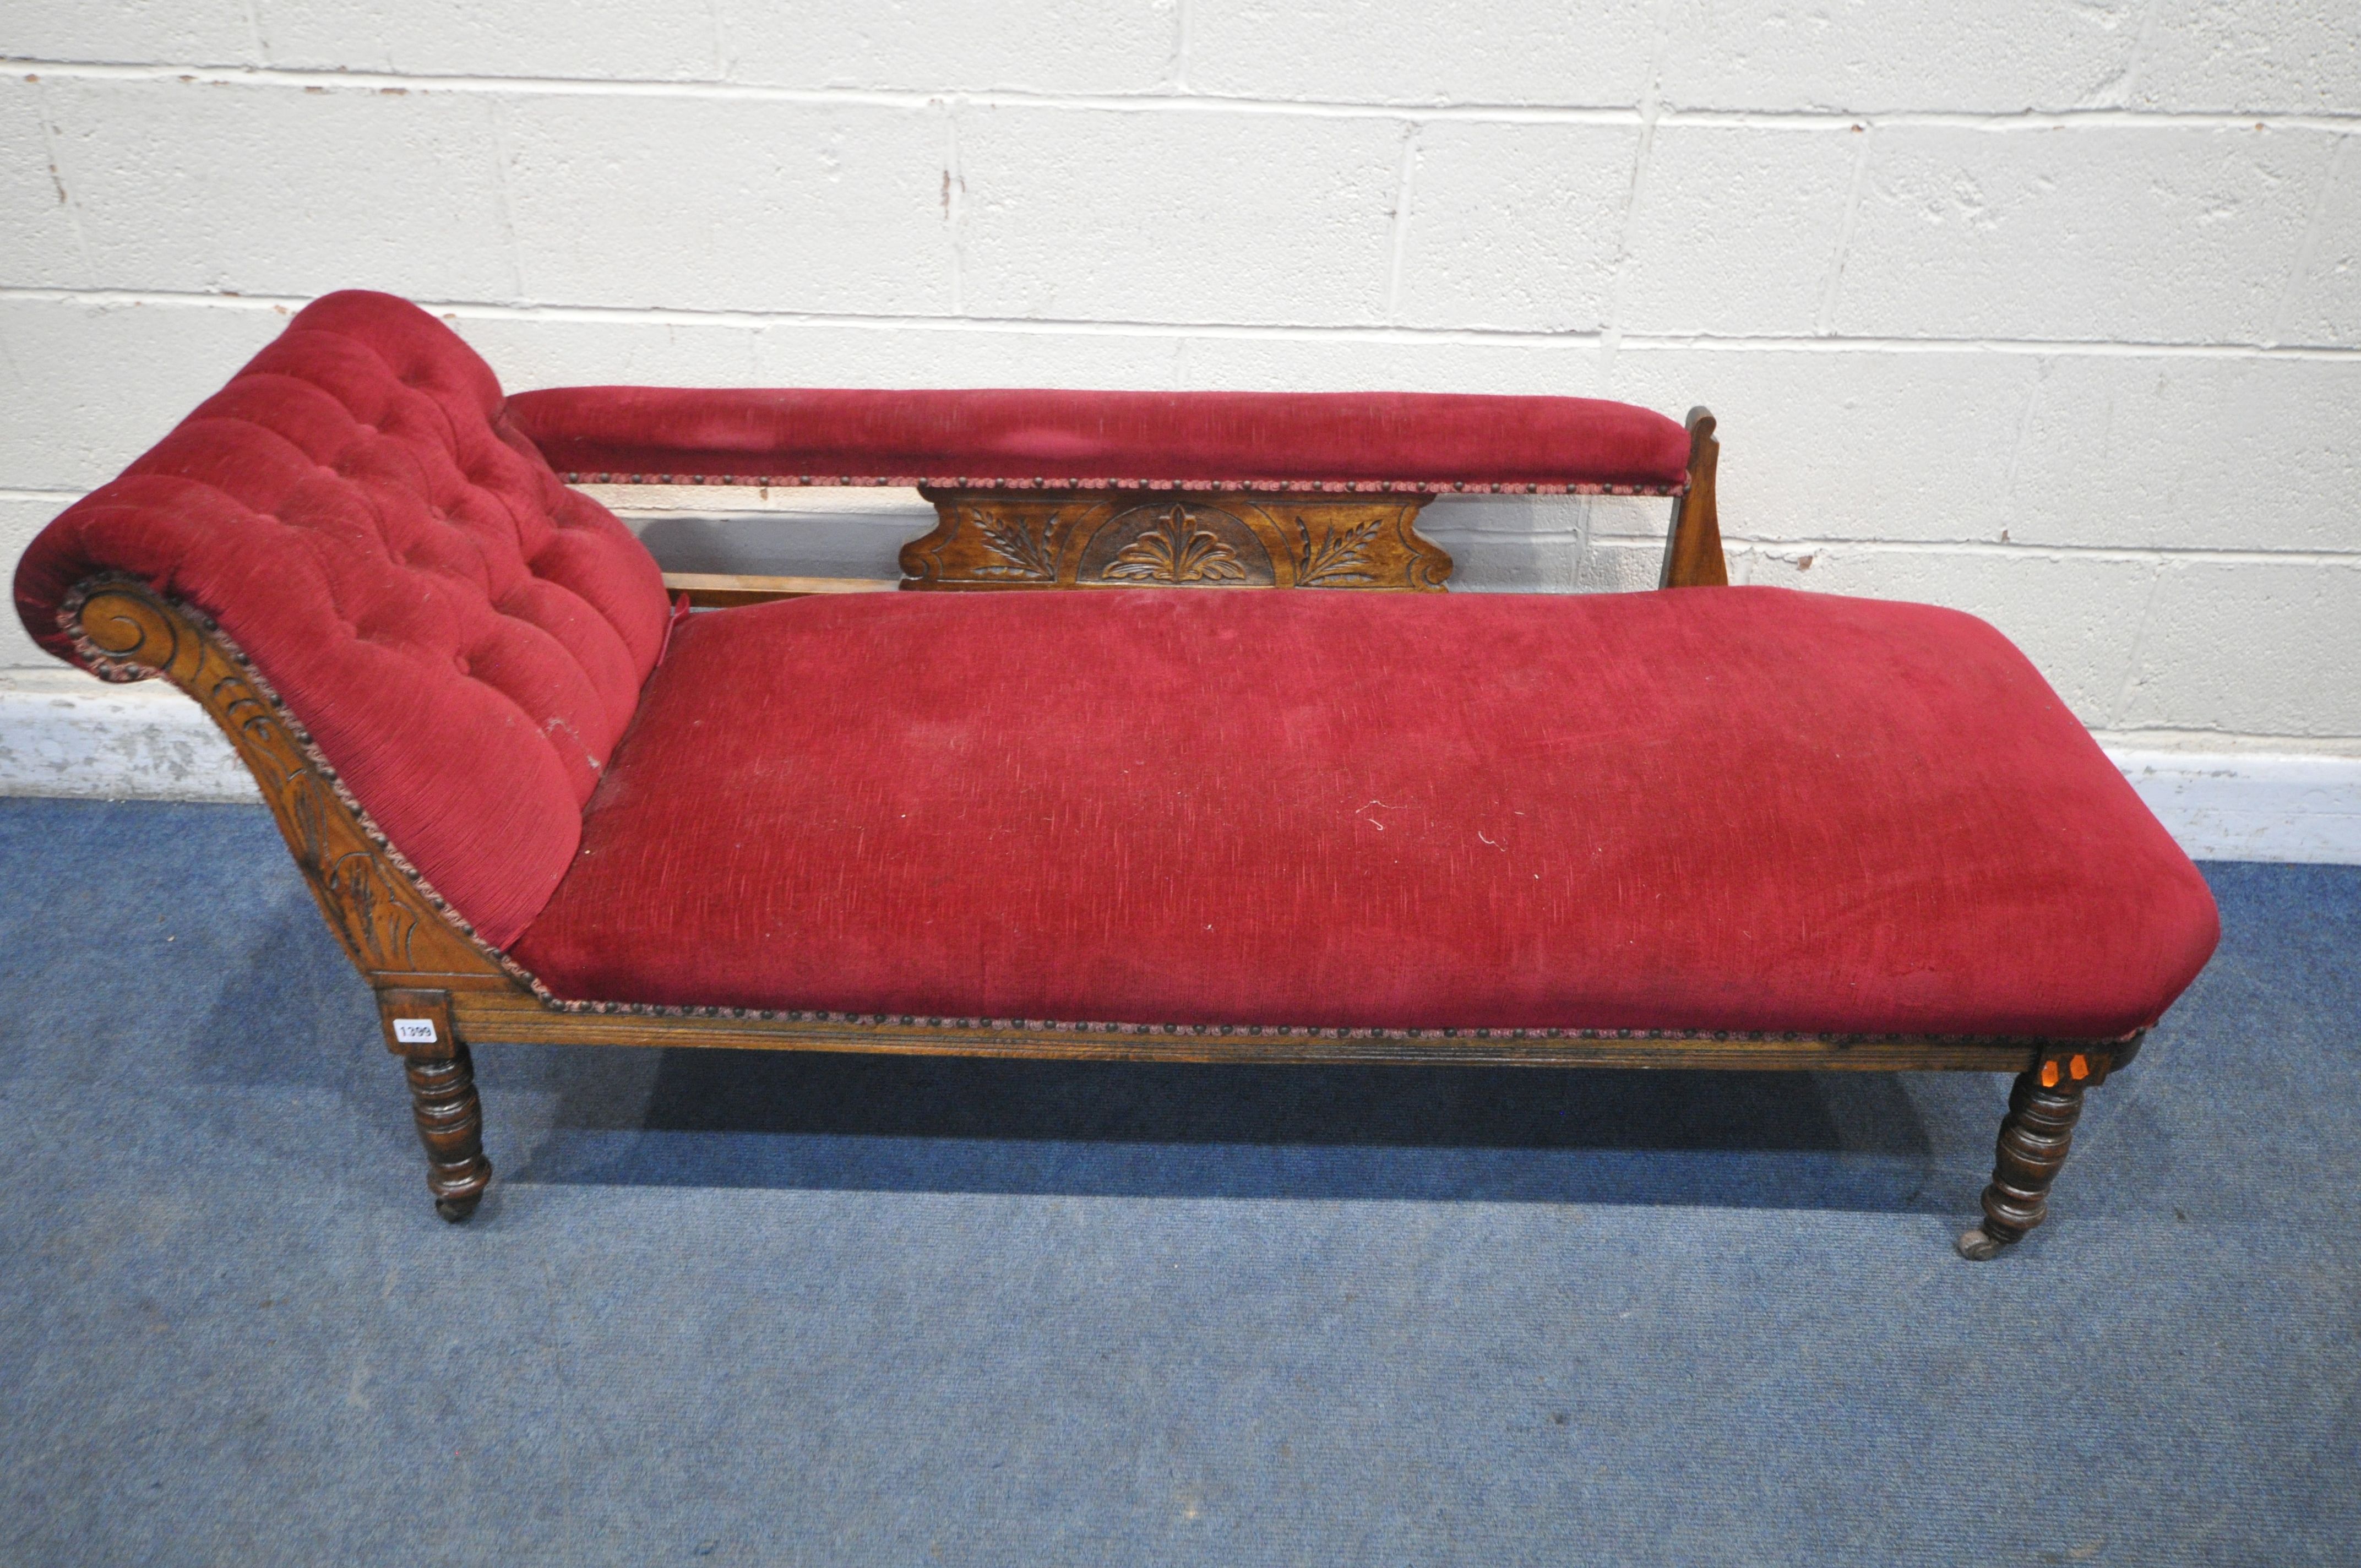 AN EDWARDIAN MAHOGANY CHAISE LONGUE, with buttoned fabric, length 172cm x depth 60cm x height